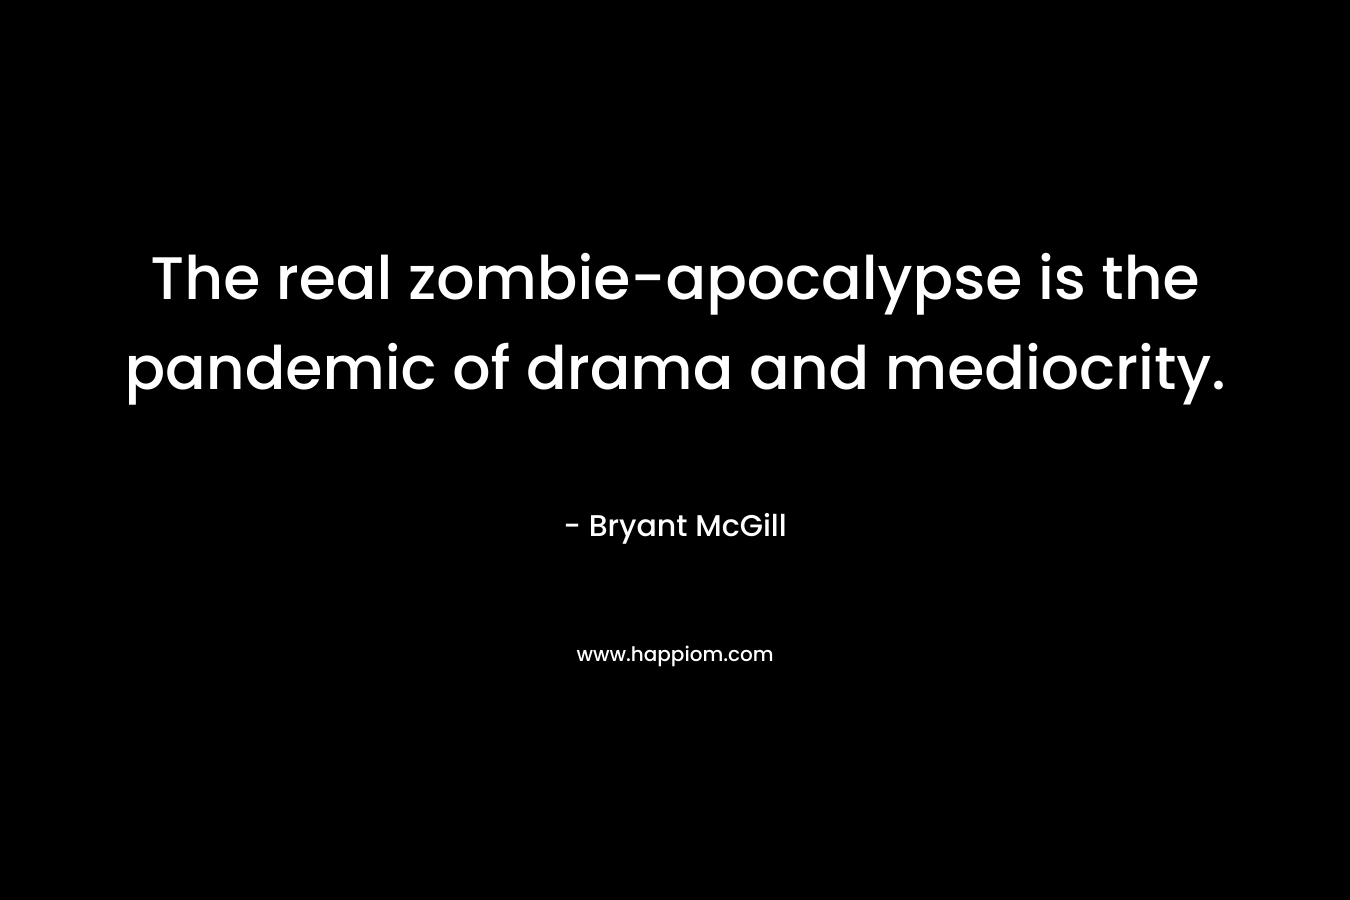 The real zombie-apocalypse is the pandemic of drama and mediocrity. – Bryant McGill